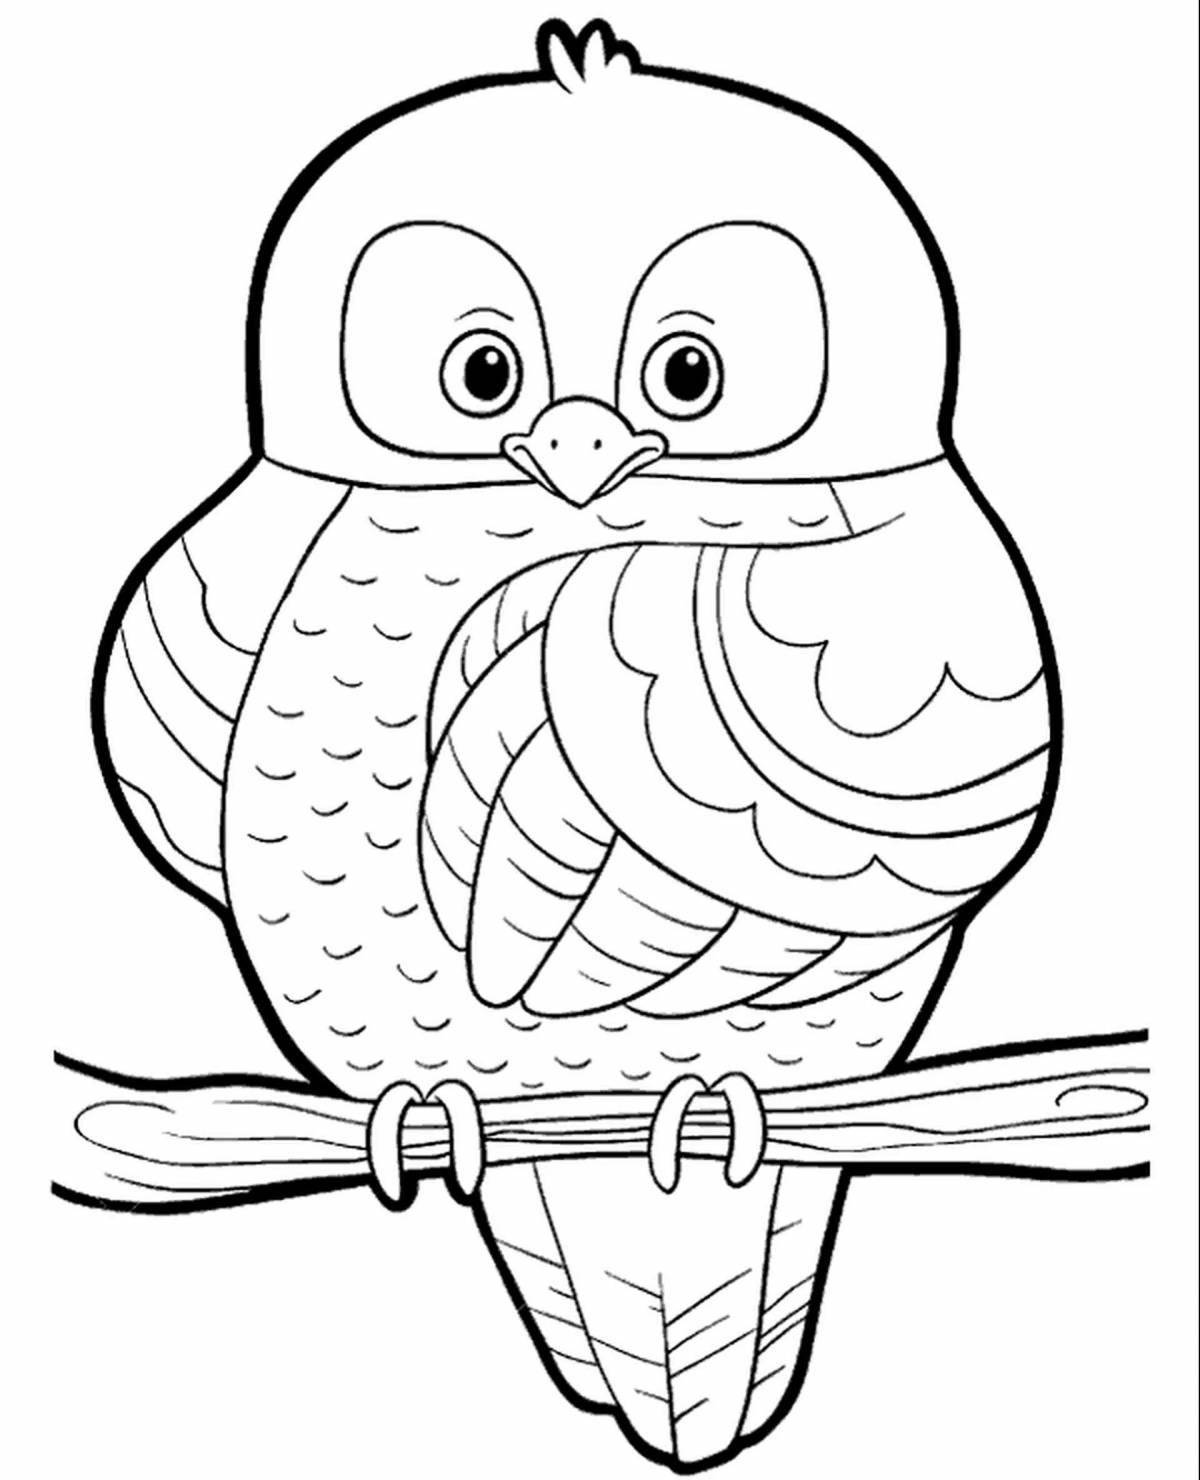 Coloring book charming long-eared owl